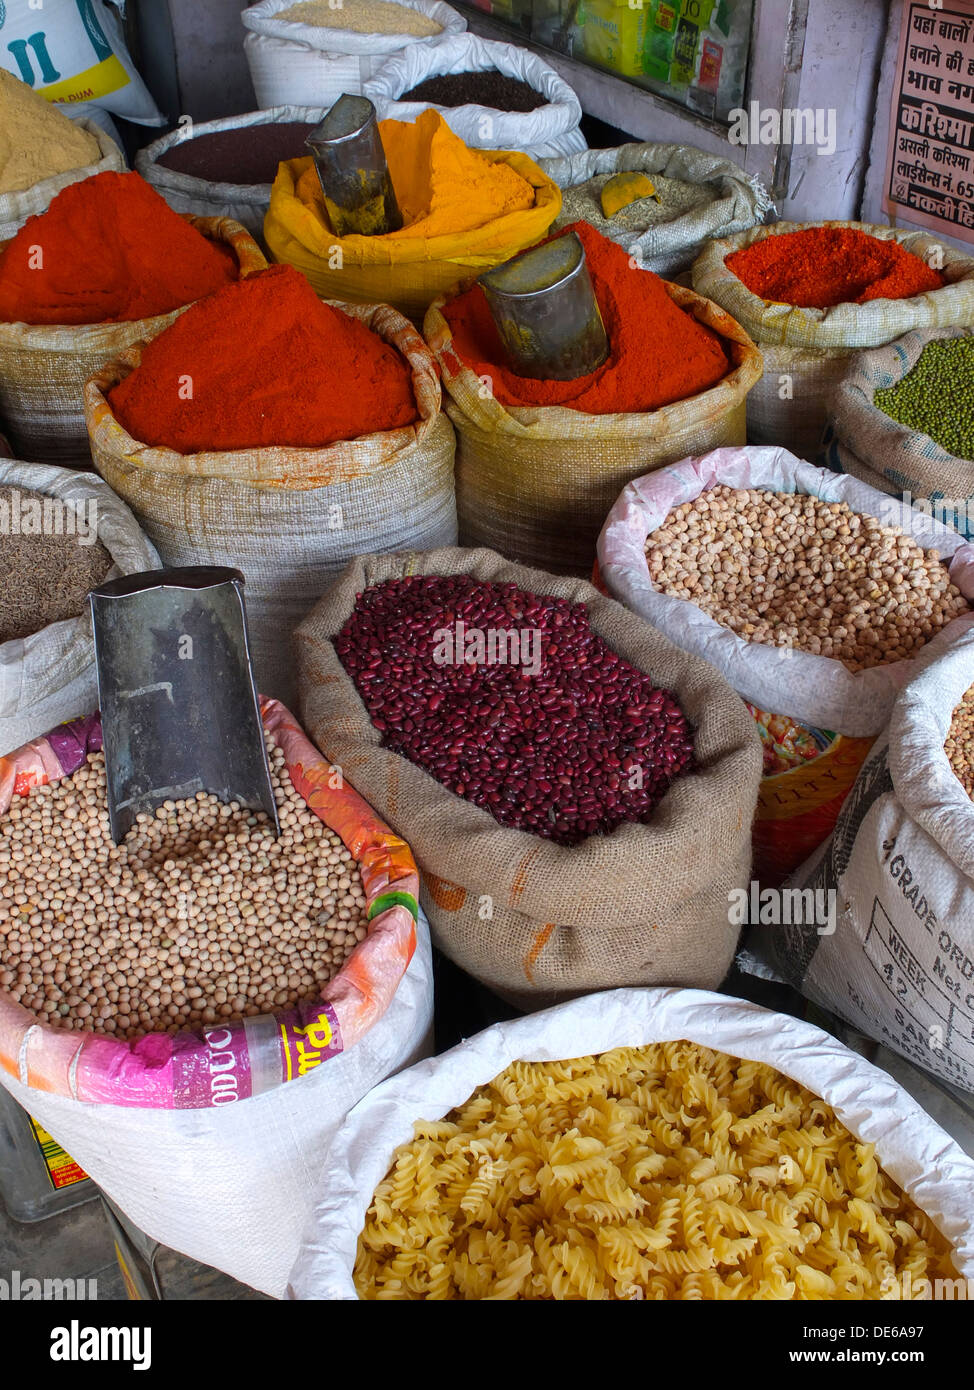 India, Rajasthan, Jaipur, pulses, pasta and spices Stock Photo